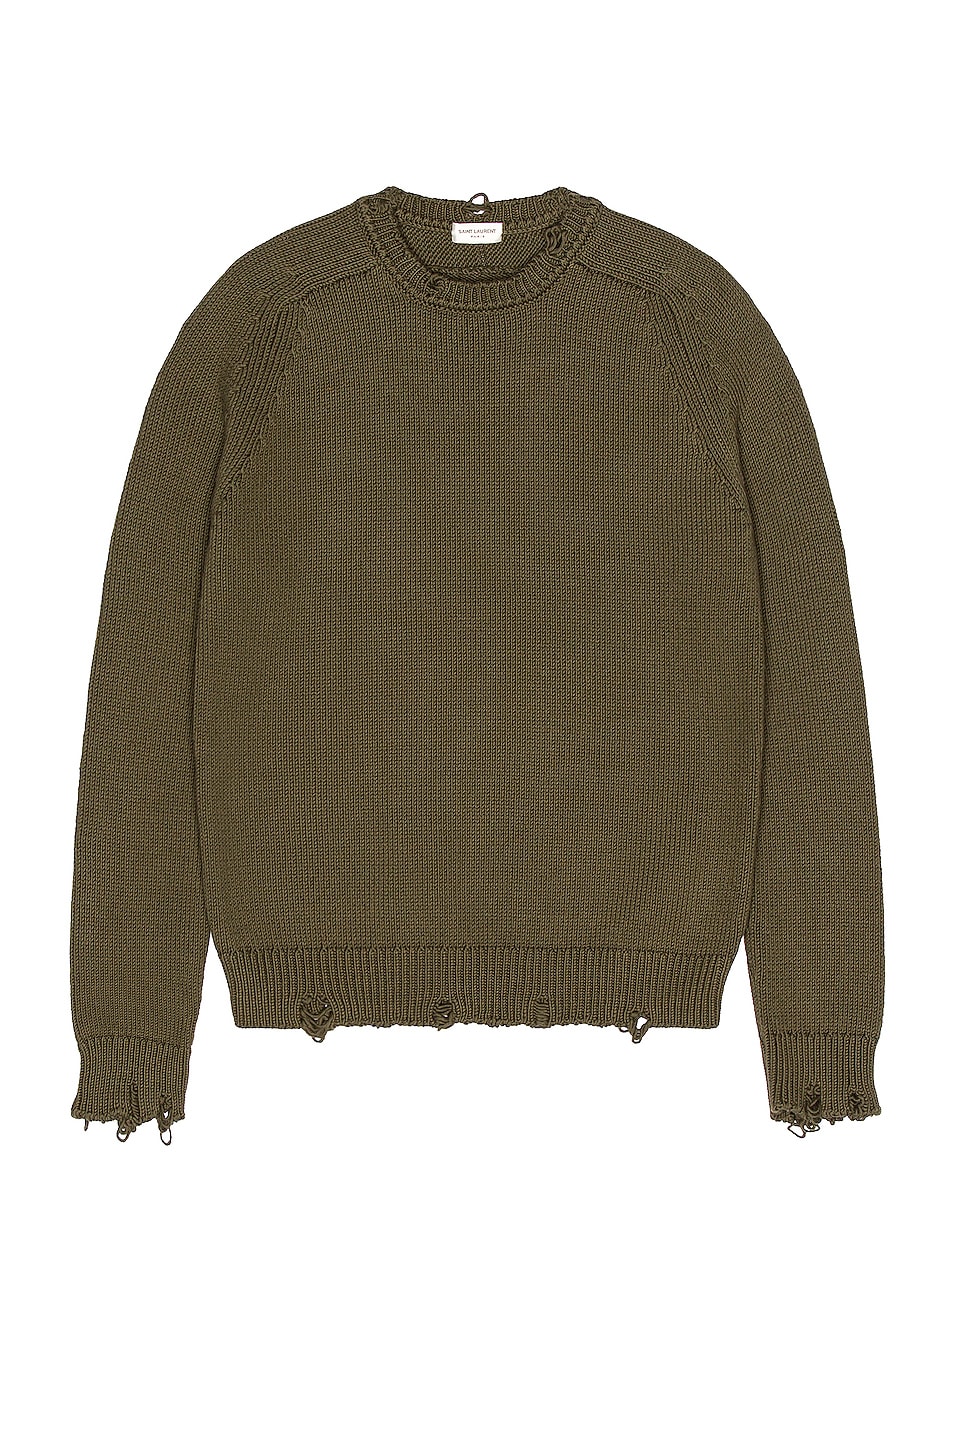 Sweater in Army